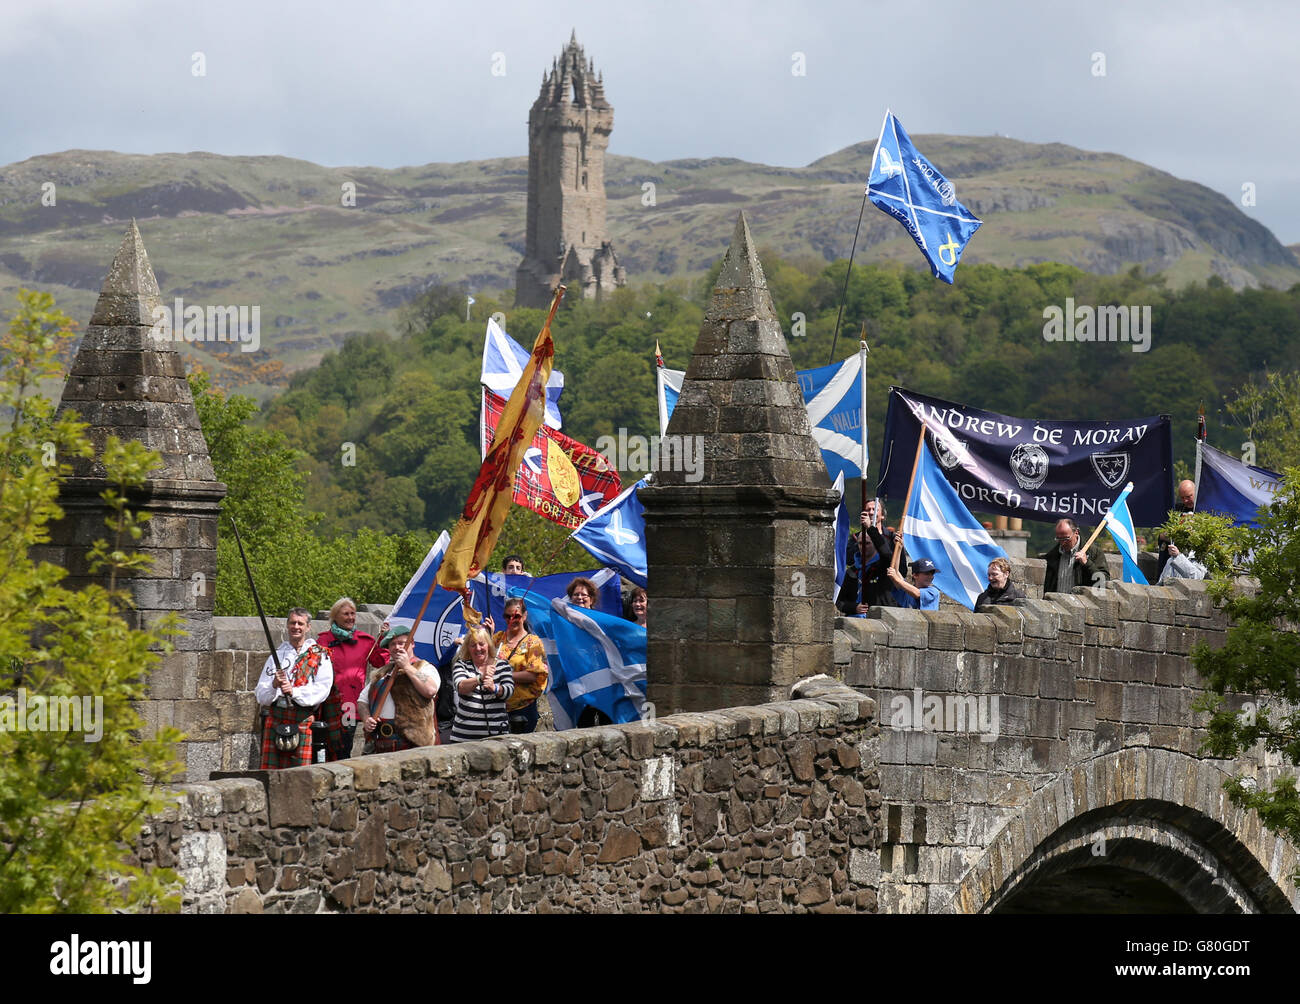 People wave Saltire flags on Stirling Bridge in front of the Wallace Monument as a memorial is unveiled at the site of the 'Braveheart battle', where William Wallace and Andrew de Moray led Scotland to victory at the Battle of Stirling Bridge in 1297. Stock Photo